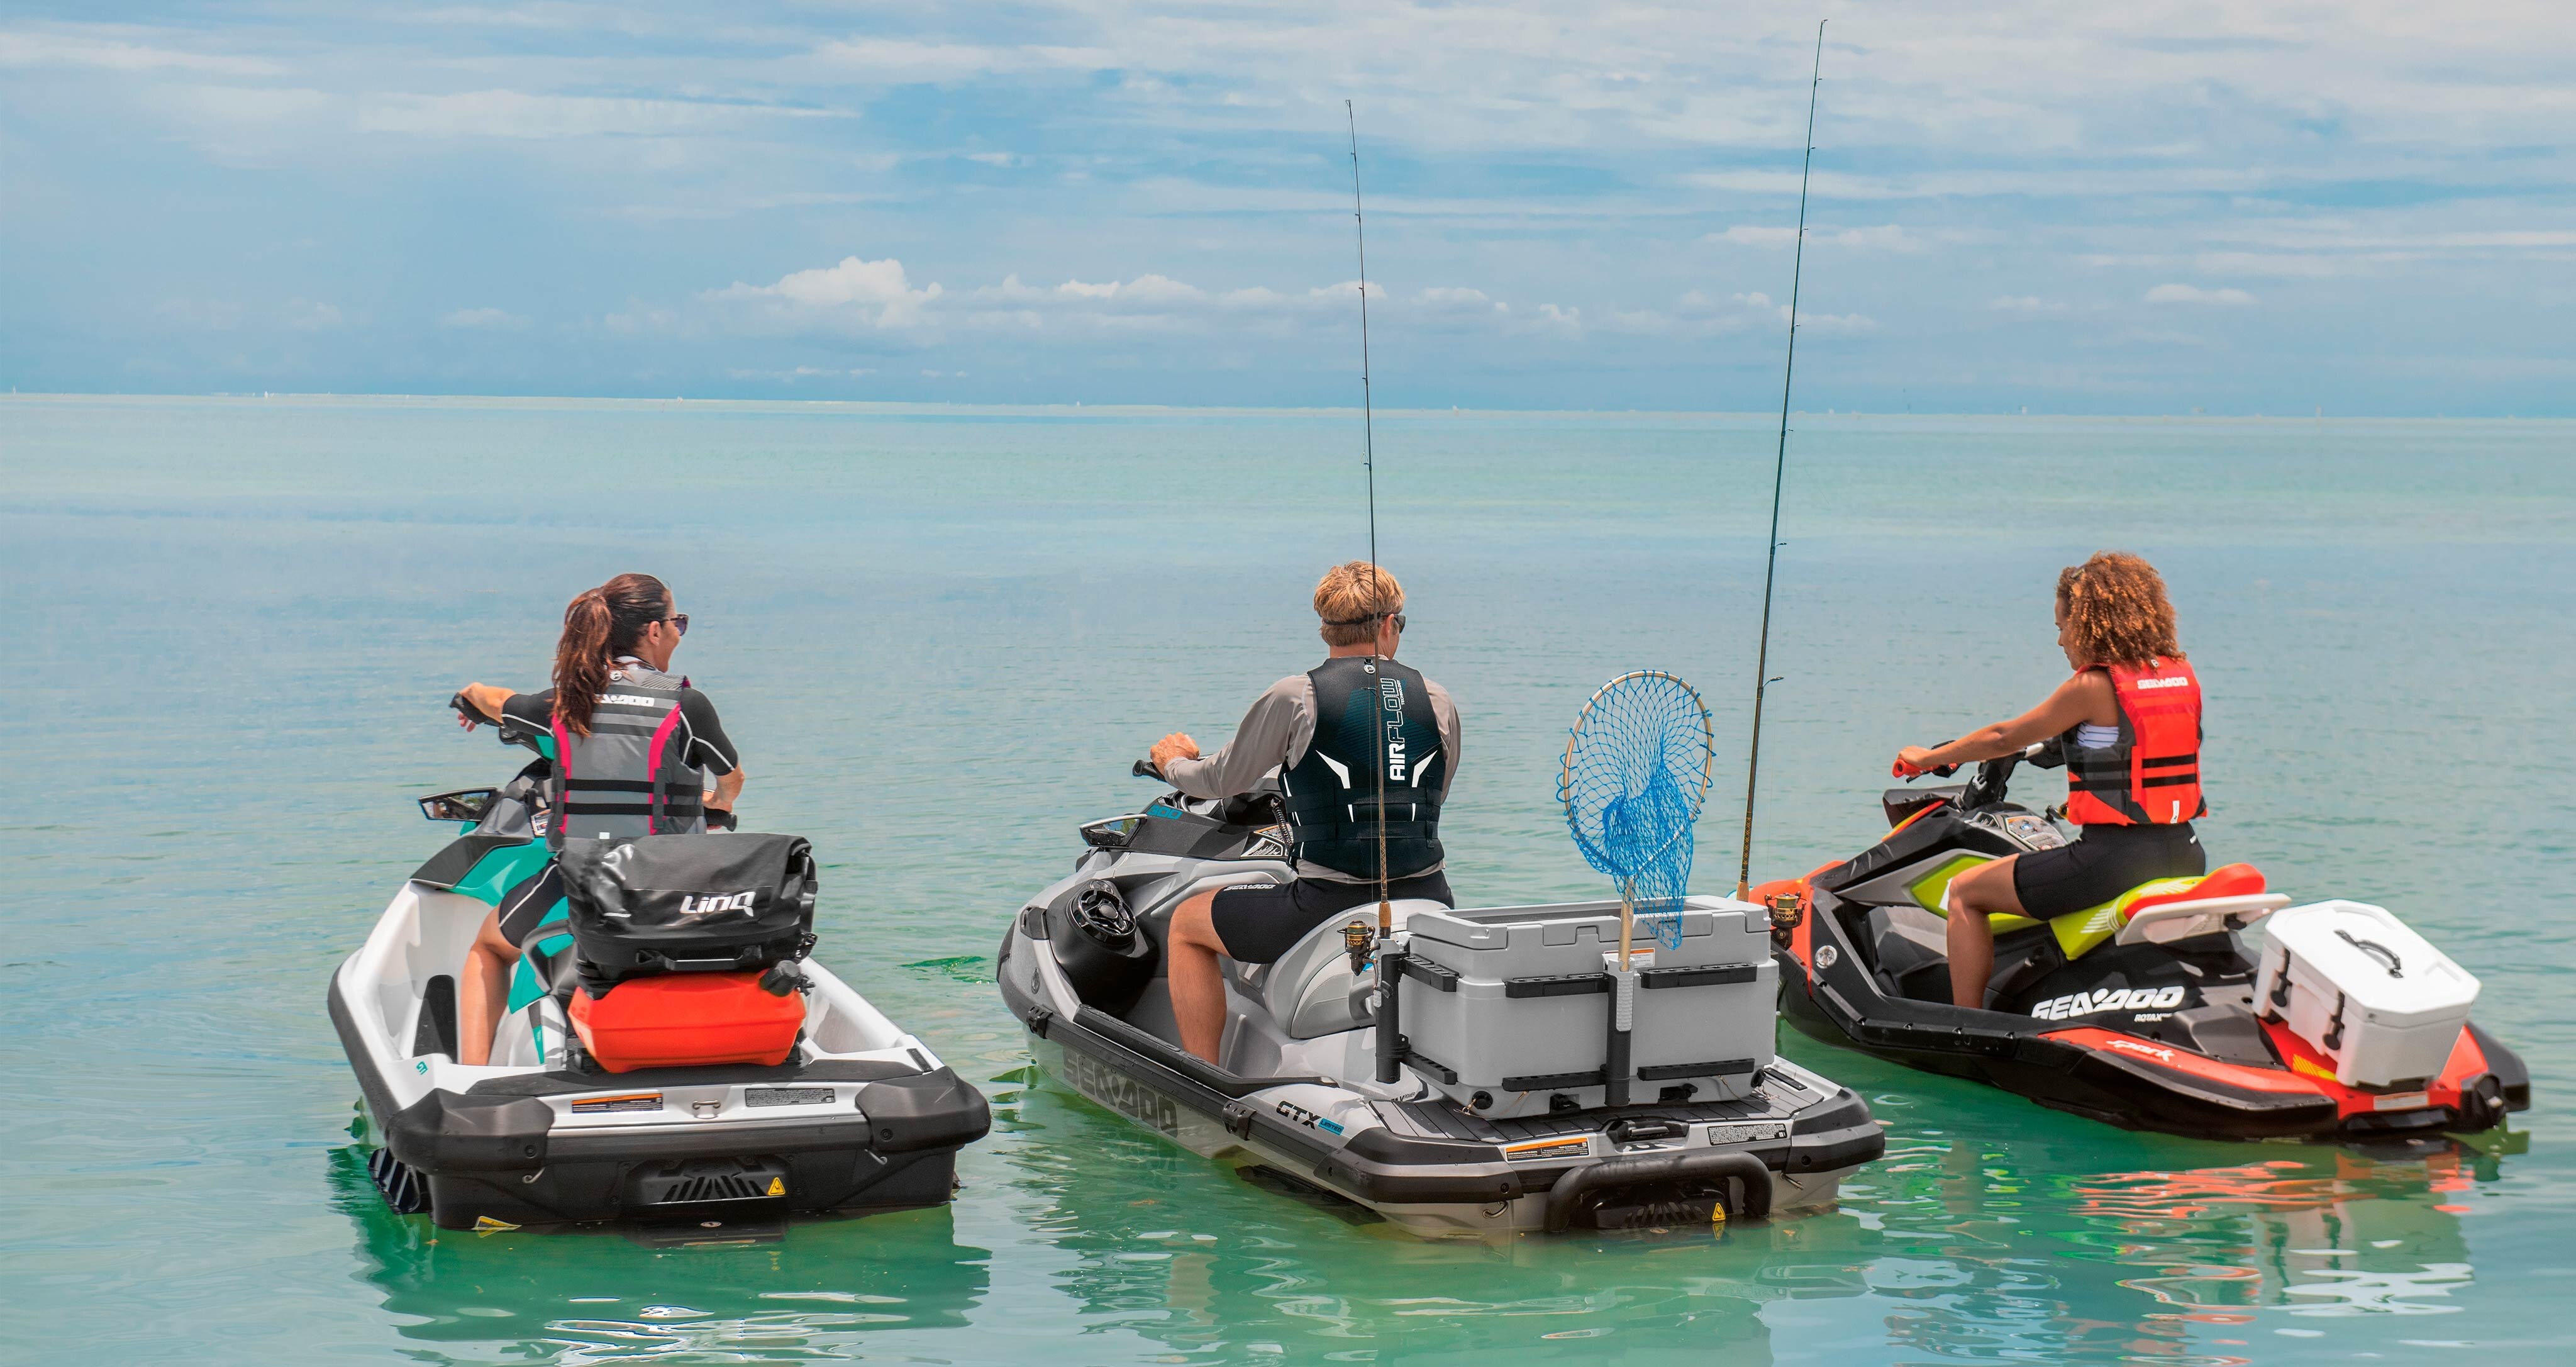 Three friends  with fishing equipment riding their Sea-doo personal watercraft